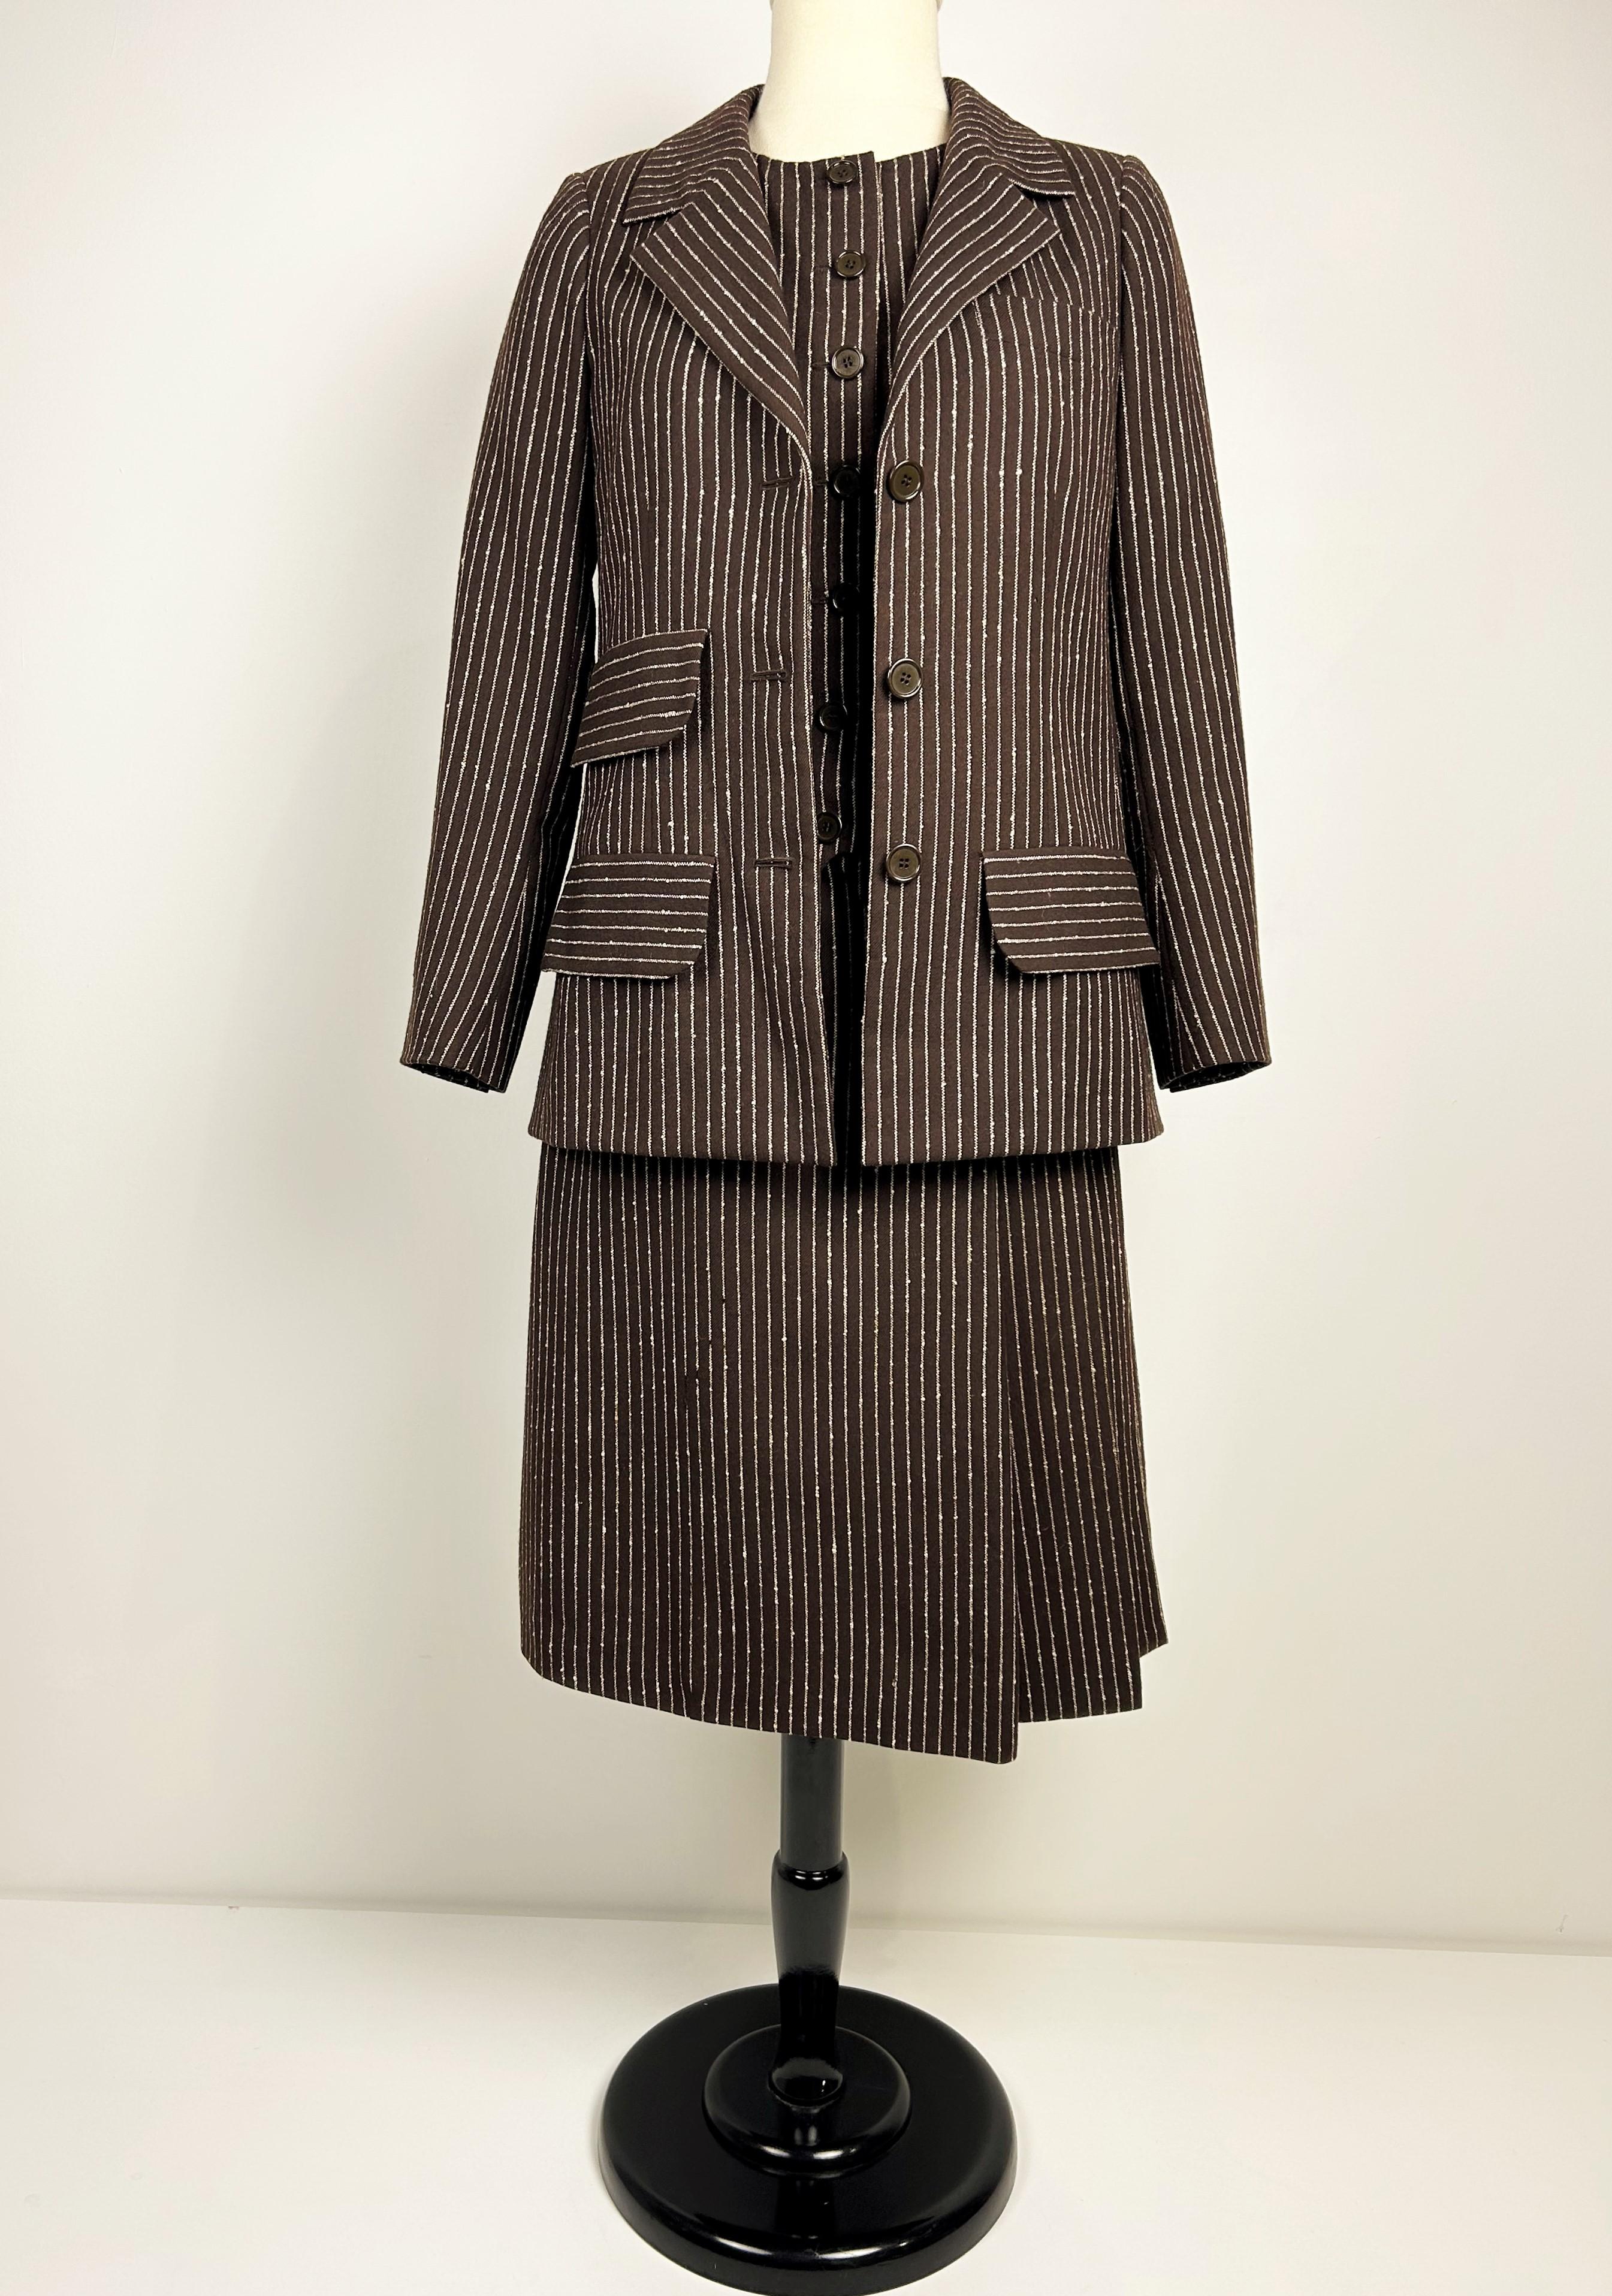 Yves Saint Laurent Haute Couture skirt-suit numbered 14539 Circa 1967/1970 For Sale 11